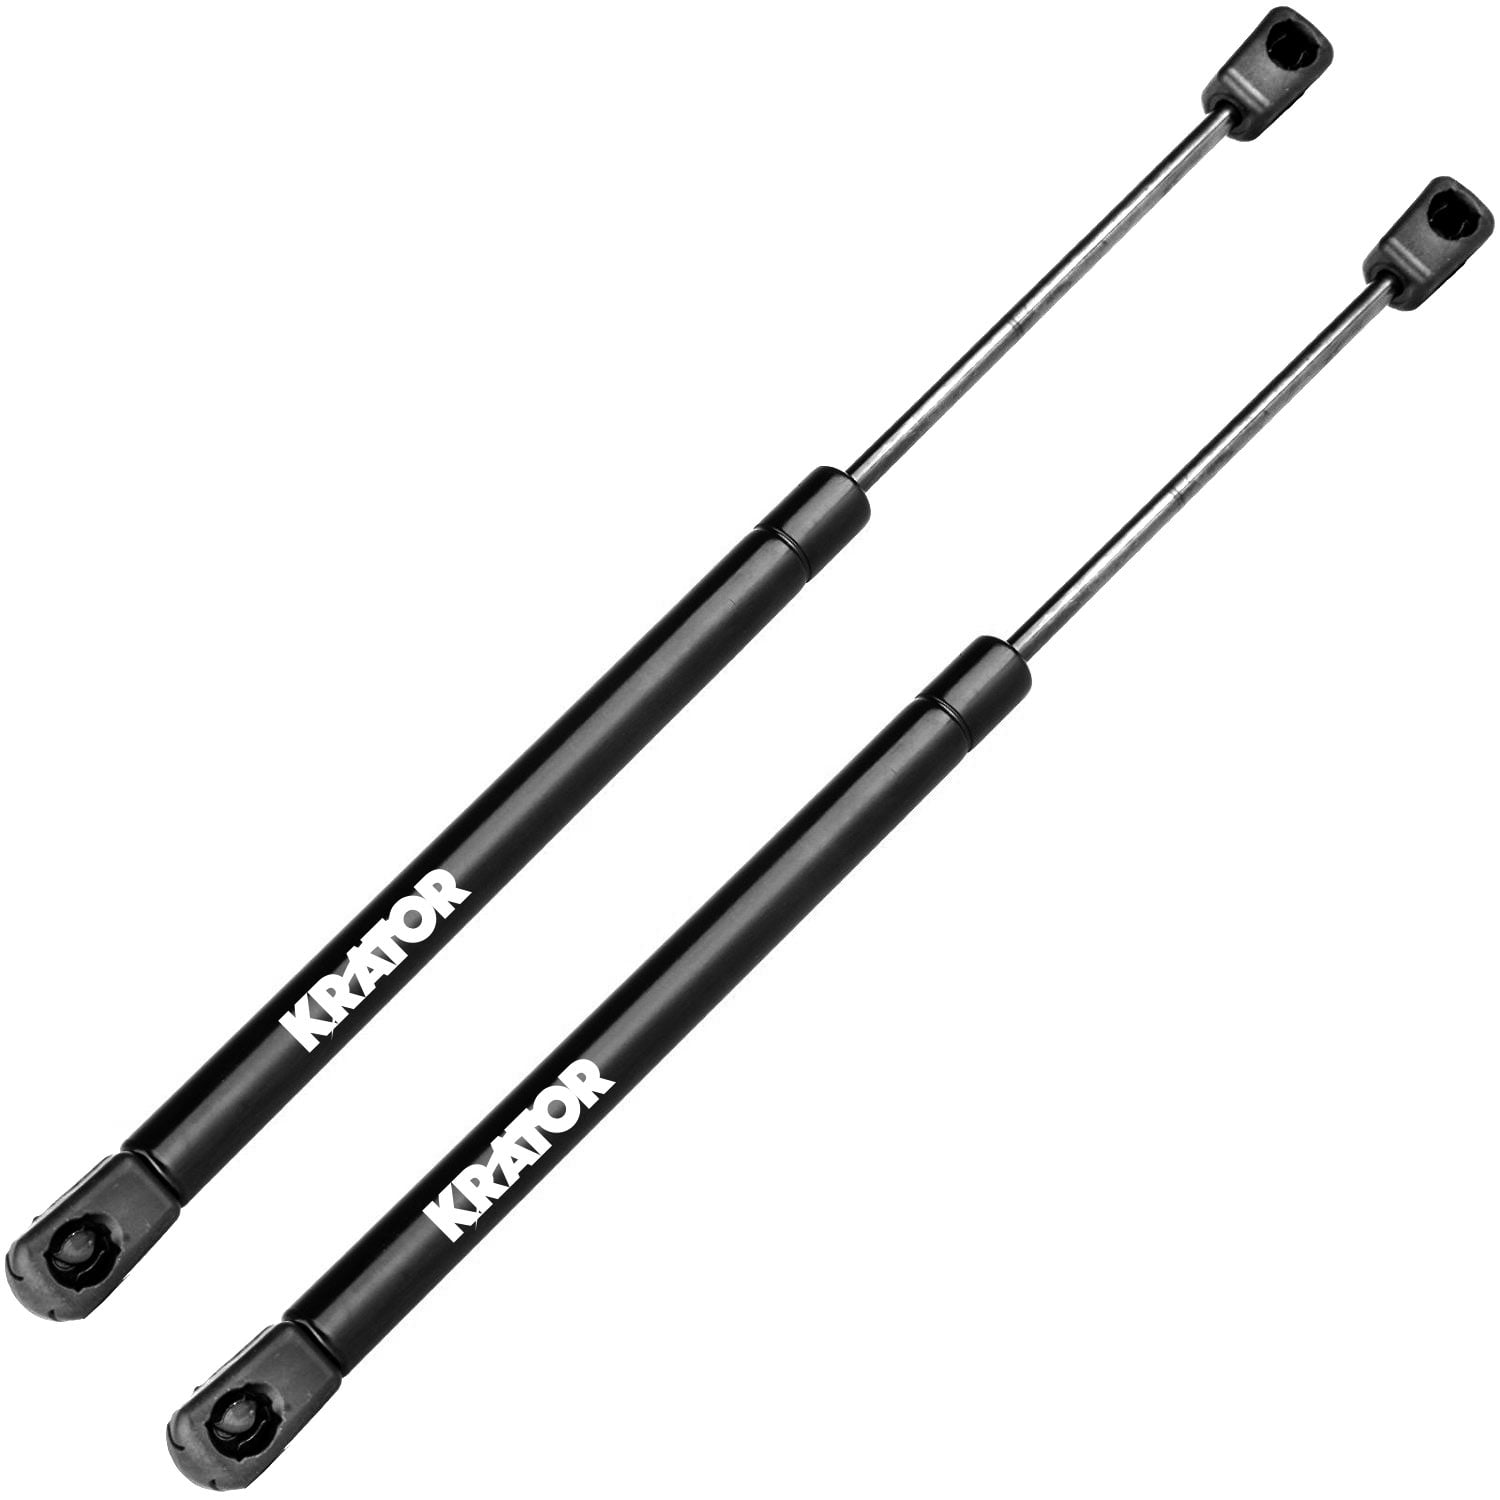 Dayincar Universal Gas Charged Lift Supports Shocks Struts Springs Compressed Length 6.75 inches Extended Length 10 inches 60lbs Force SG459003 Set of 2